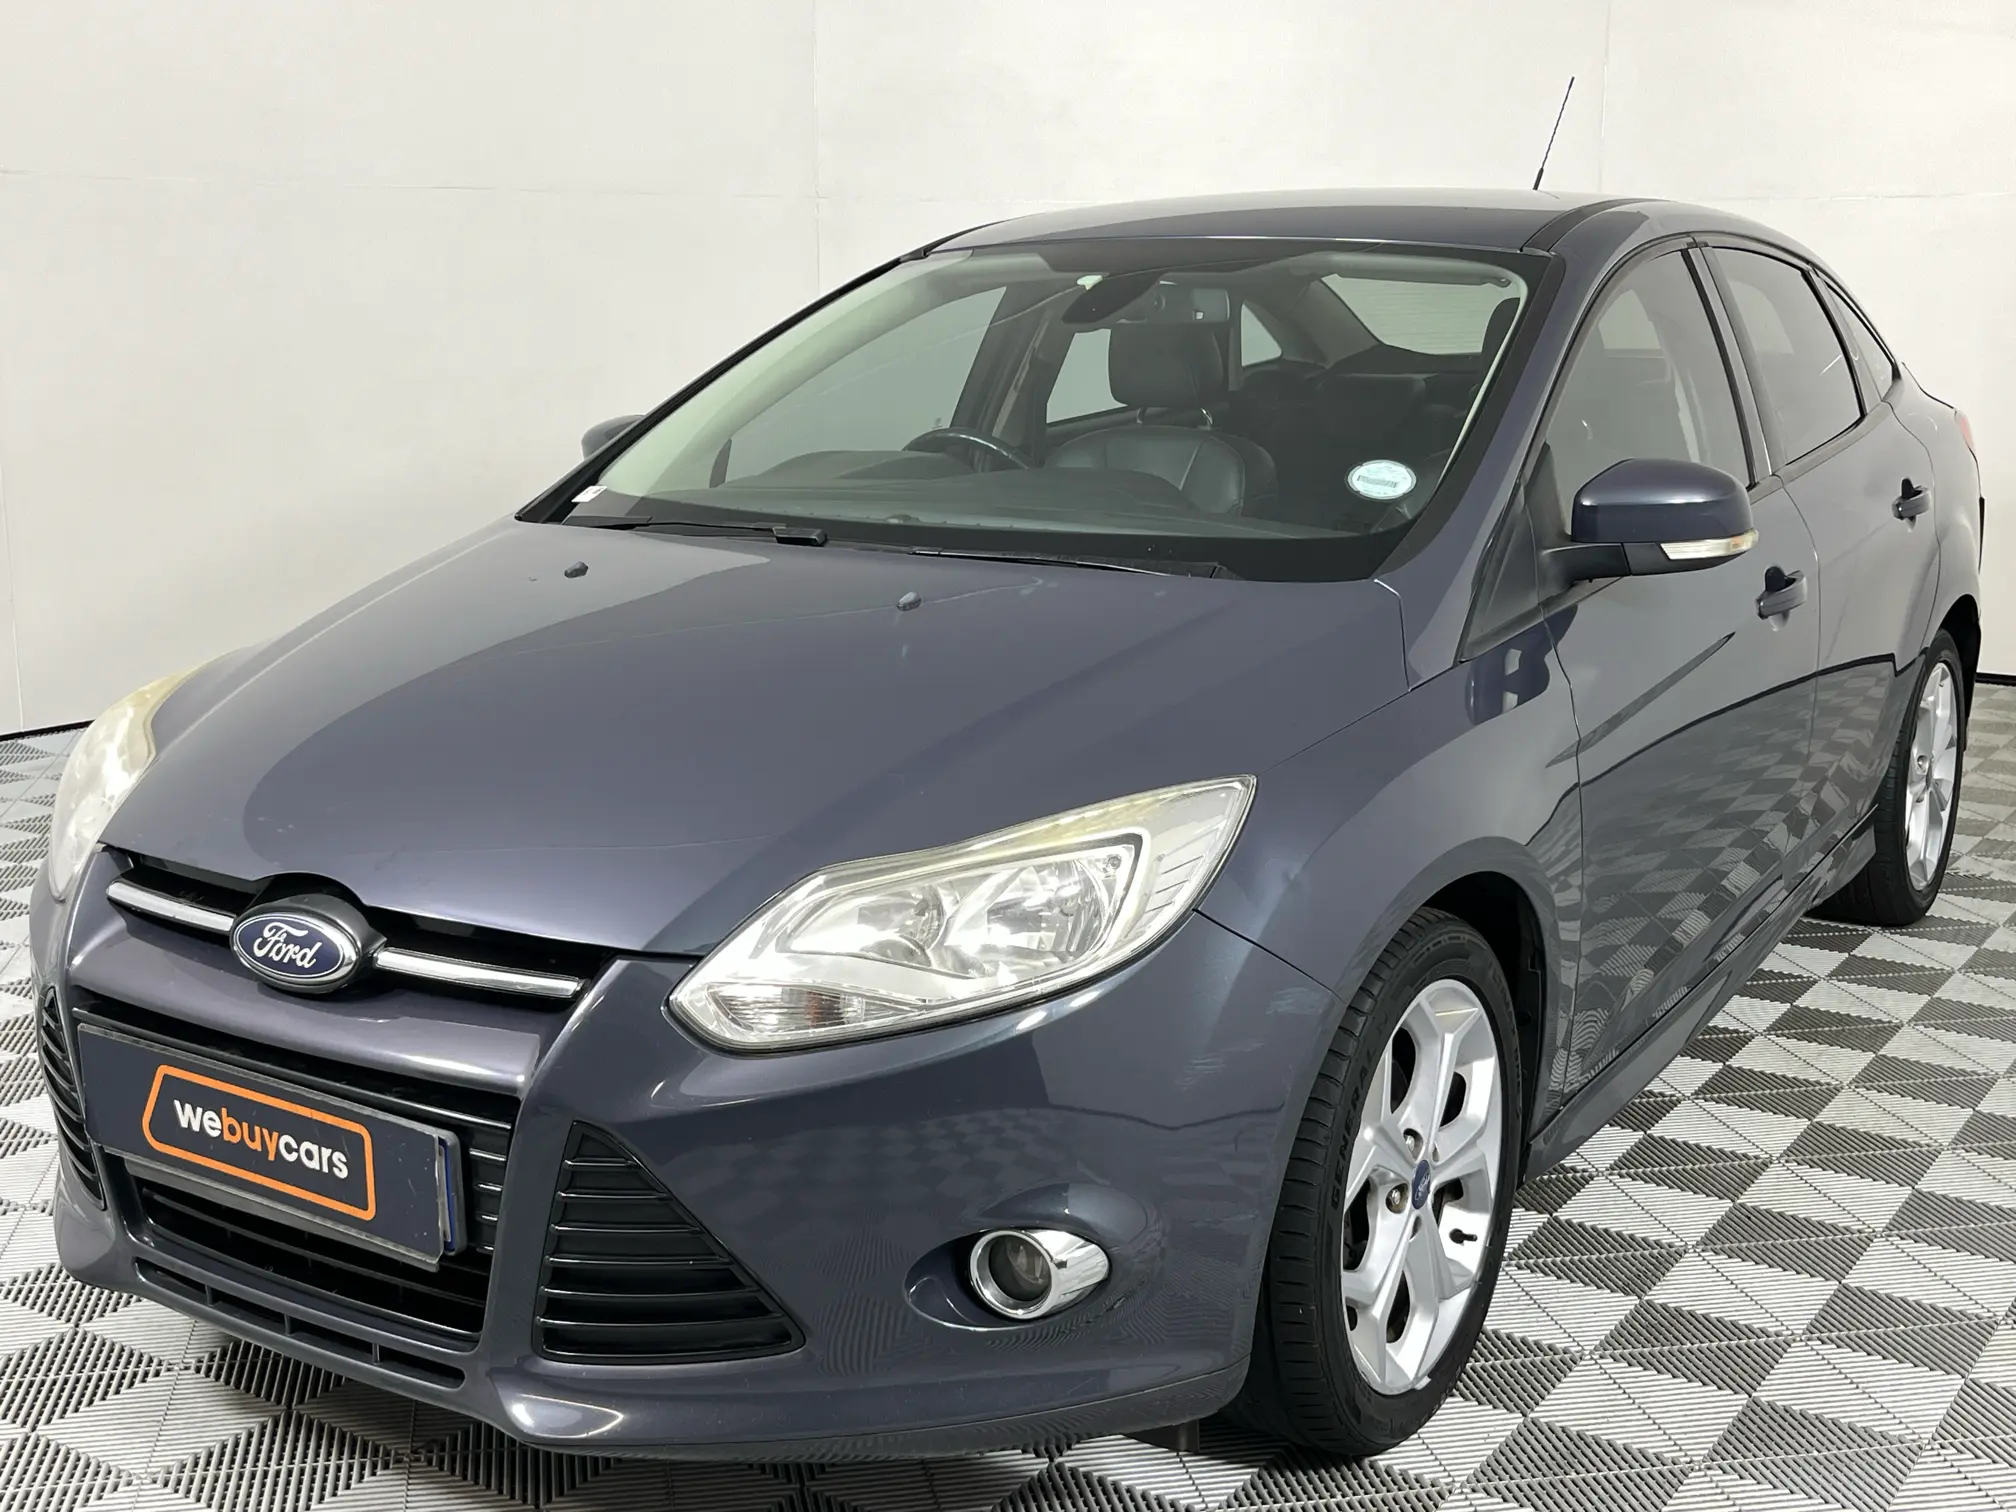 2013 Ford Focus 2.0 GDI Trend